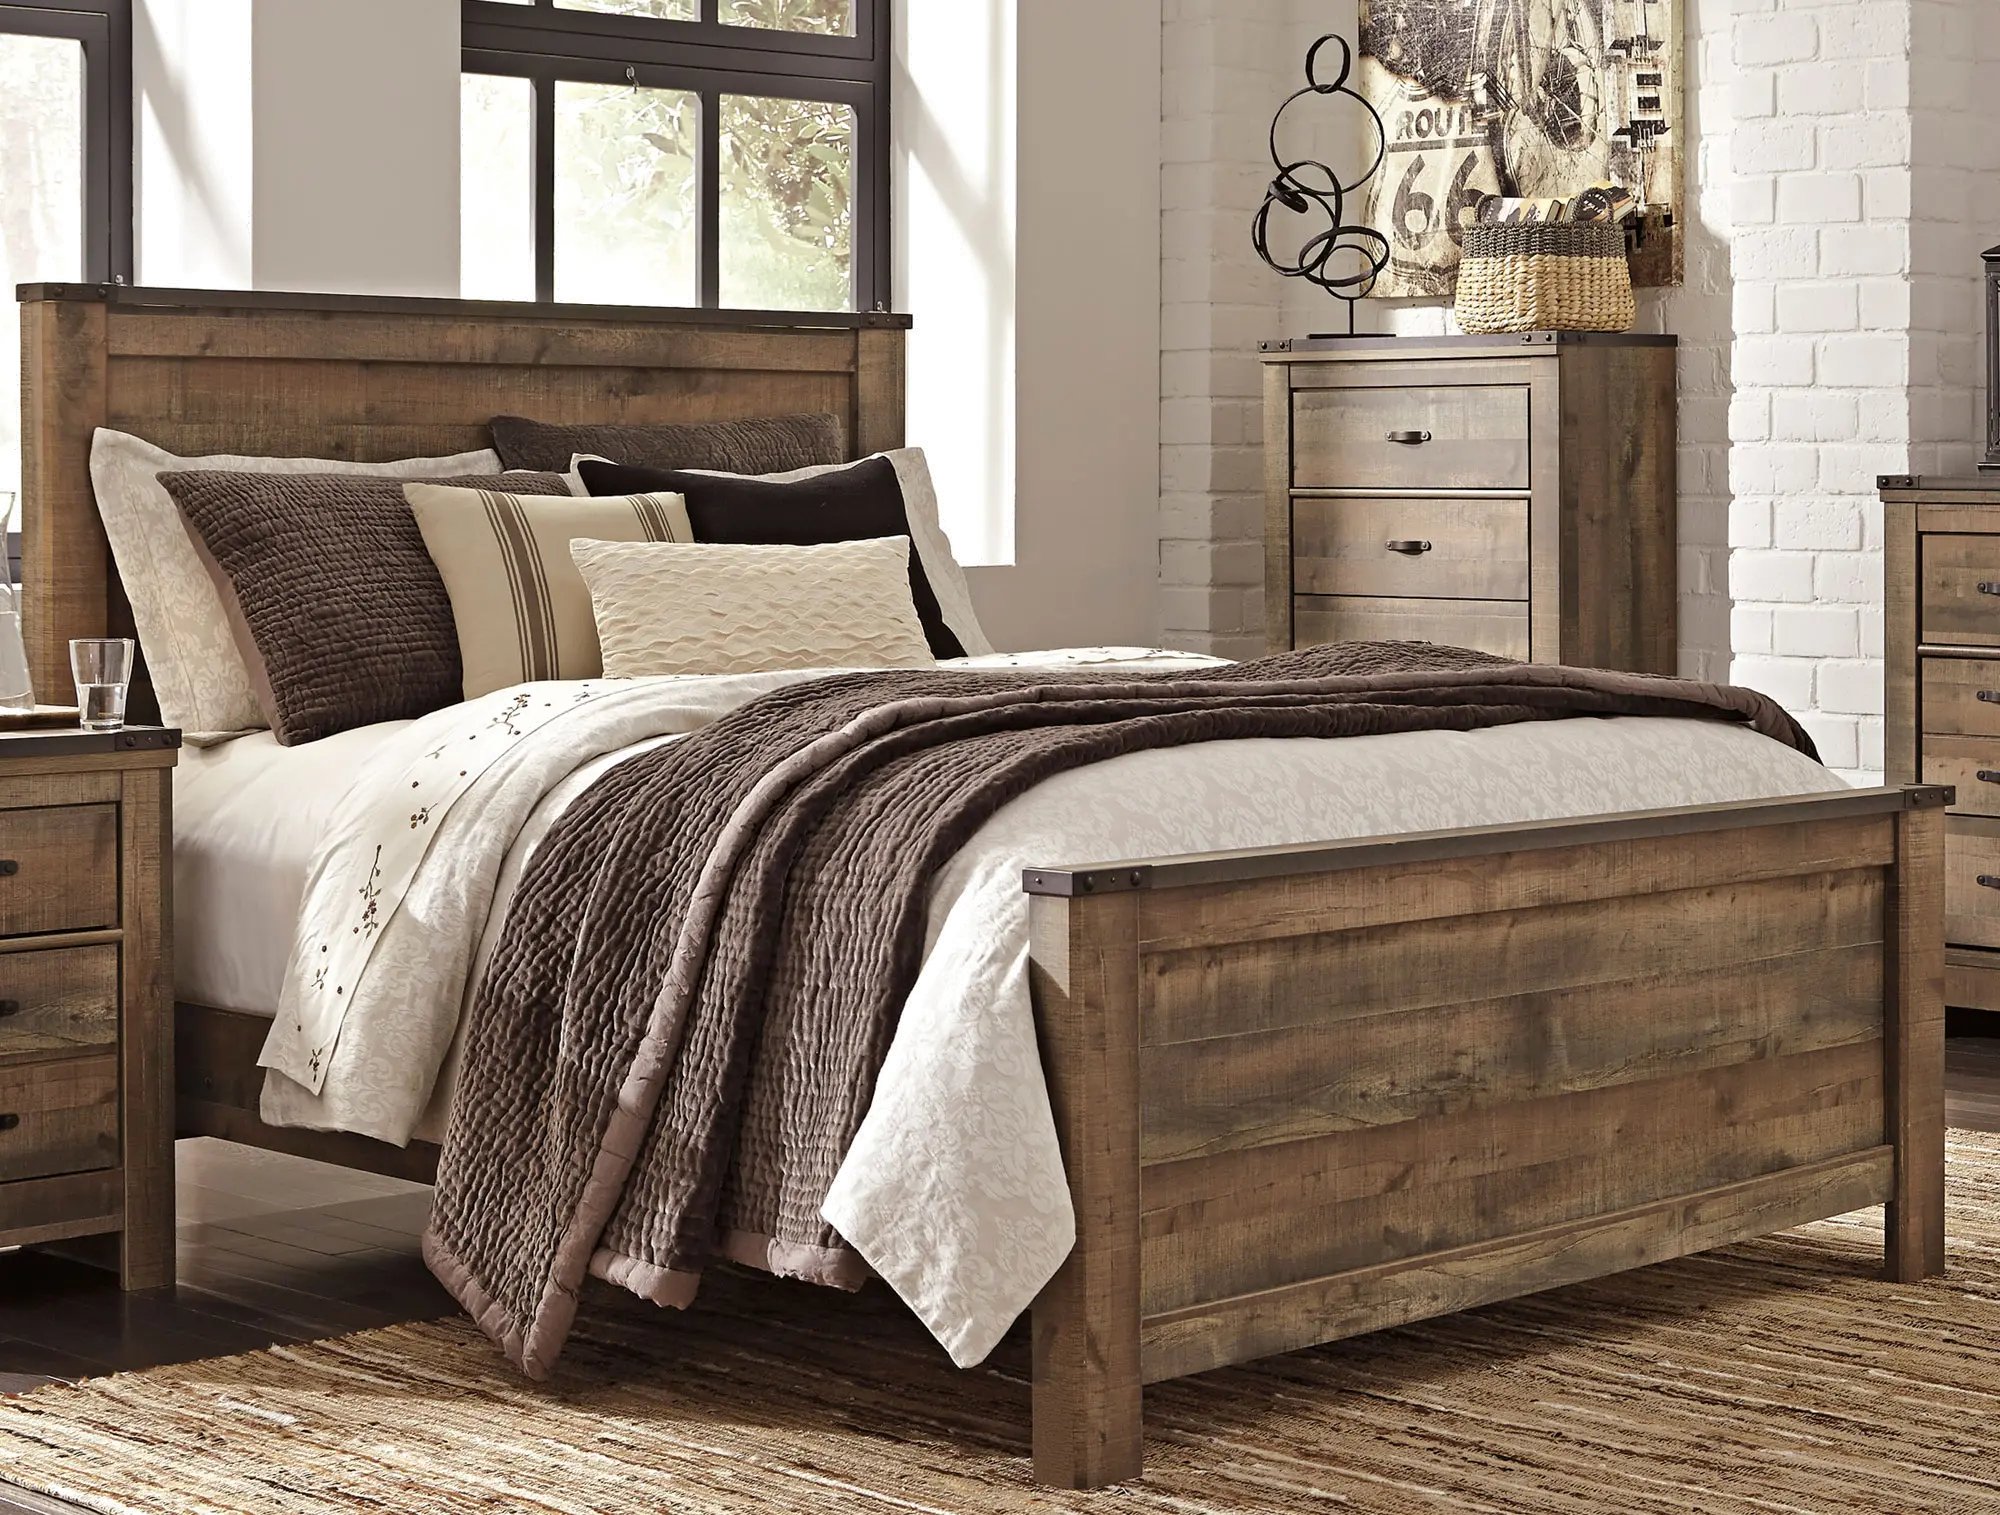 Rustic Casual Contemporary Queen Bed   Trinell Rcwilley Image1 